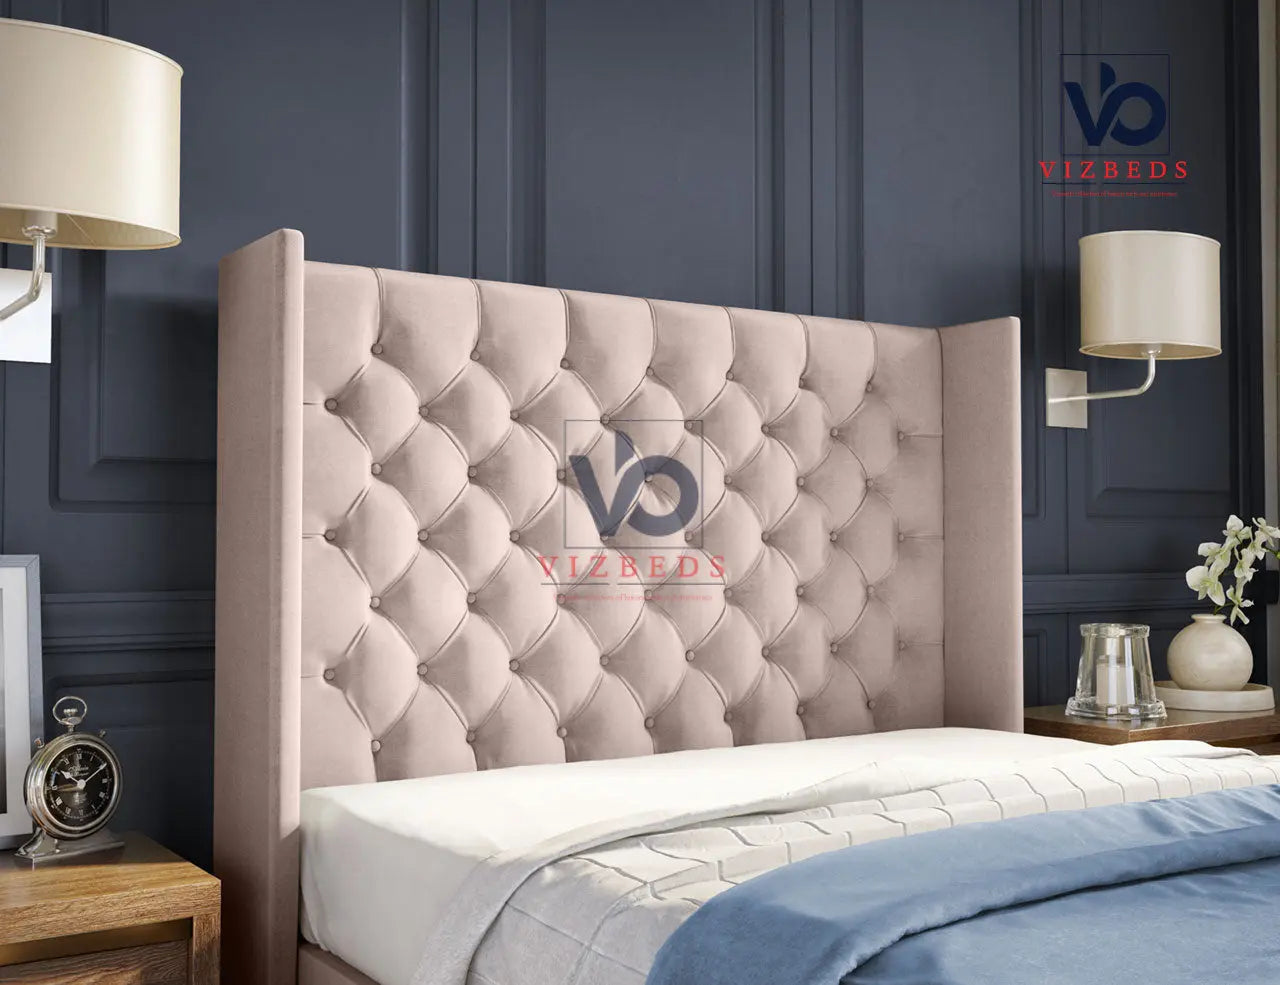 Milano Chesterfield Winged Storage Ottoman Divan Bed With Luxury Headboard